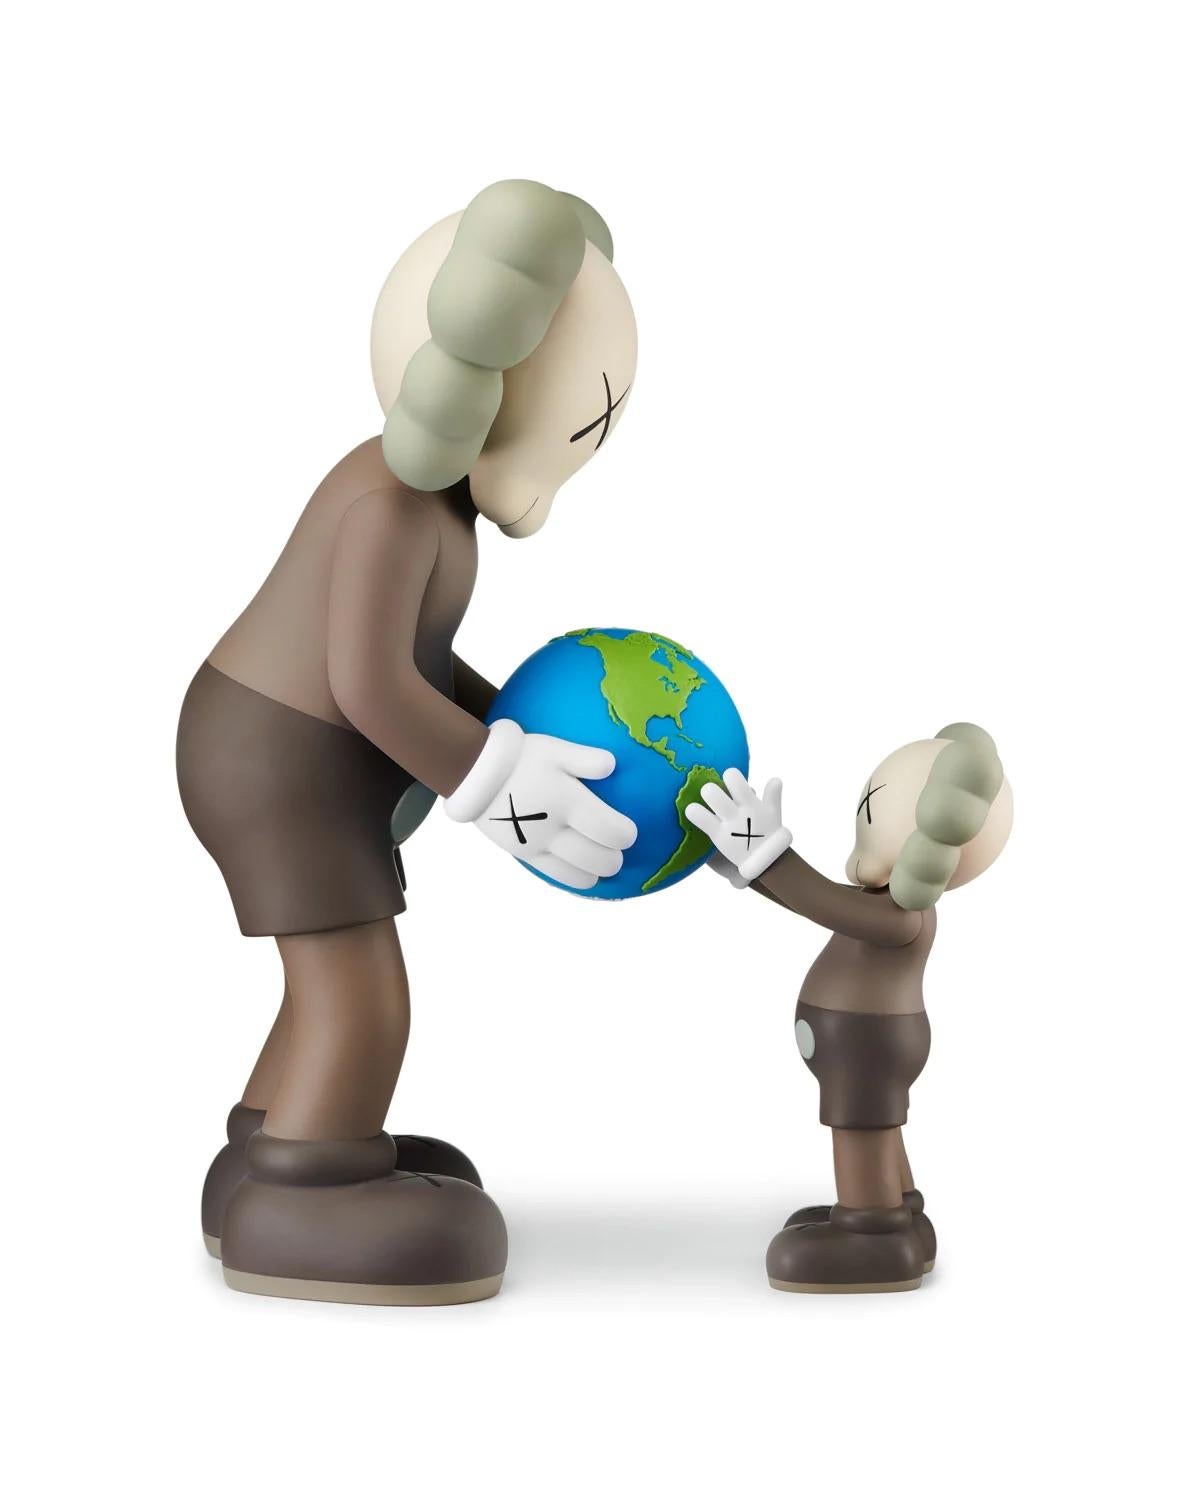 KAWS The Promise (set of 2 works):
A unique KAWS Companion set in the artist’s signature brown & grey color ways. KAWS The Promise features a blue & green globe being affectionately shared between parent & child. These timeless, highly collectible